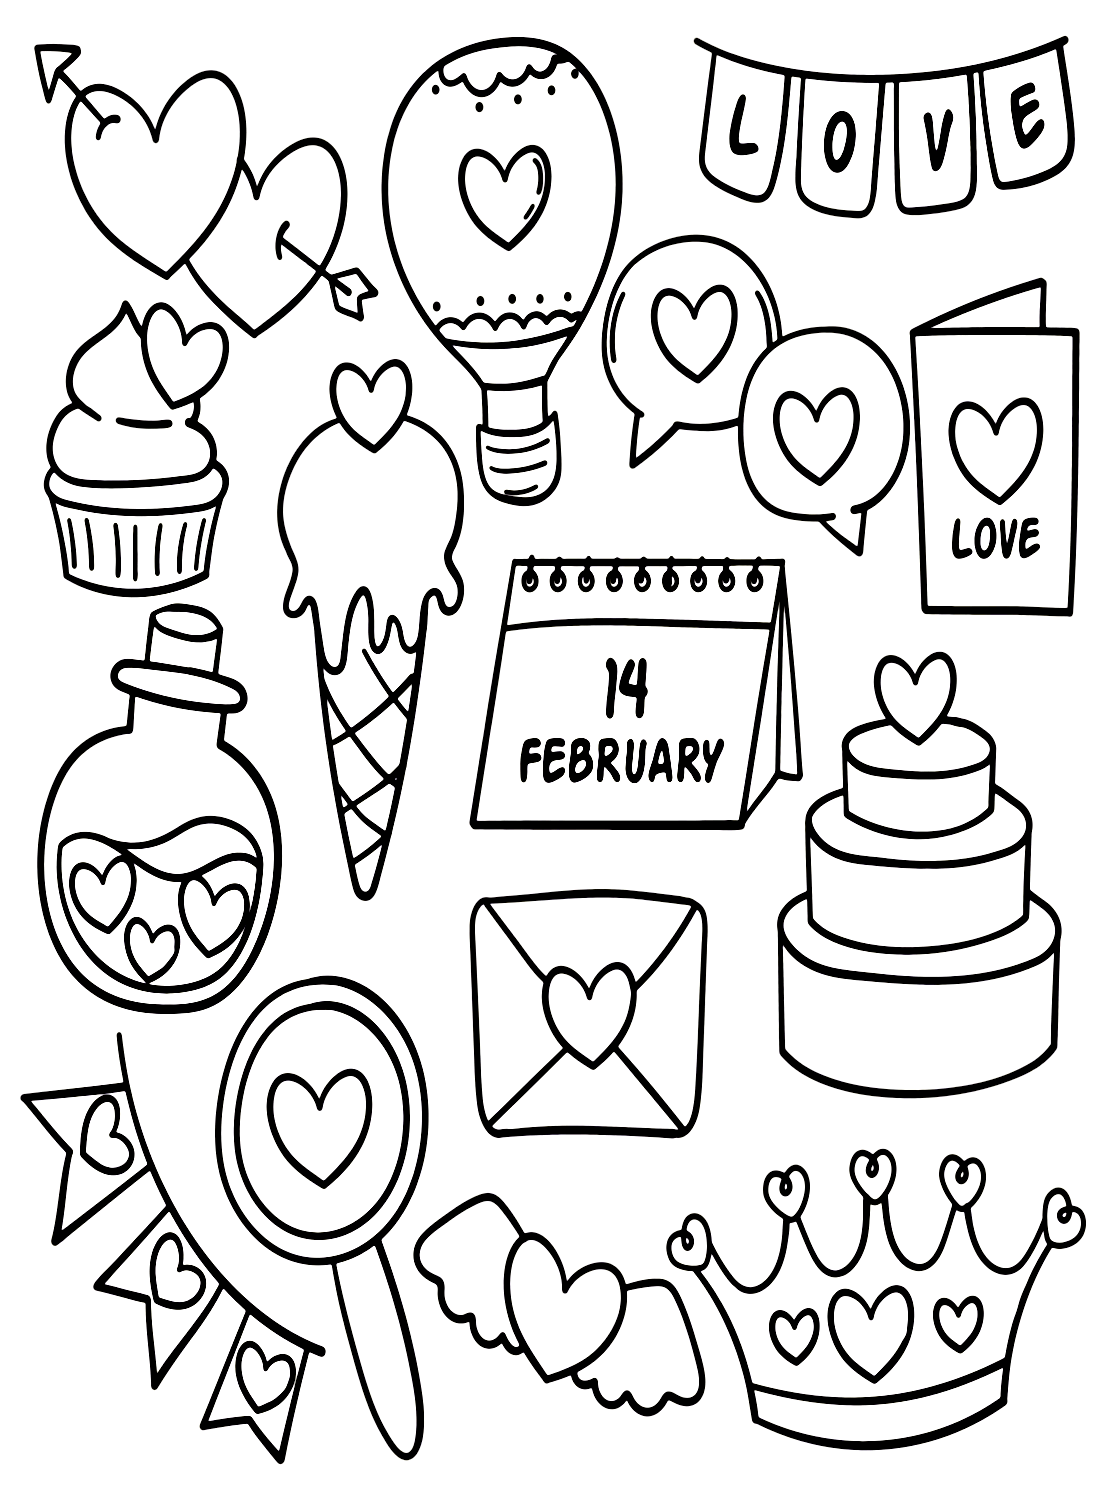 February Free Coloring Page